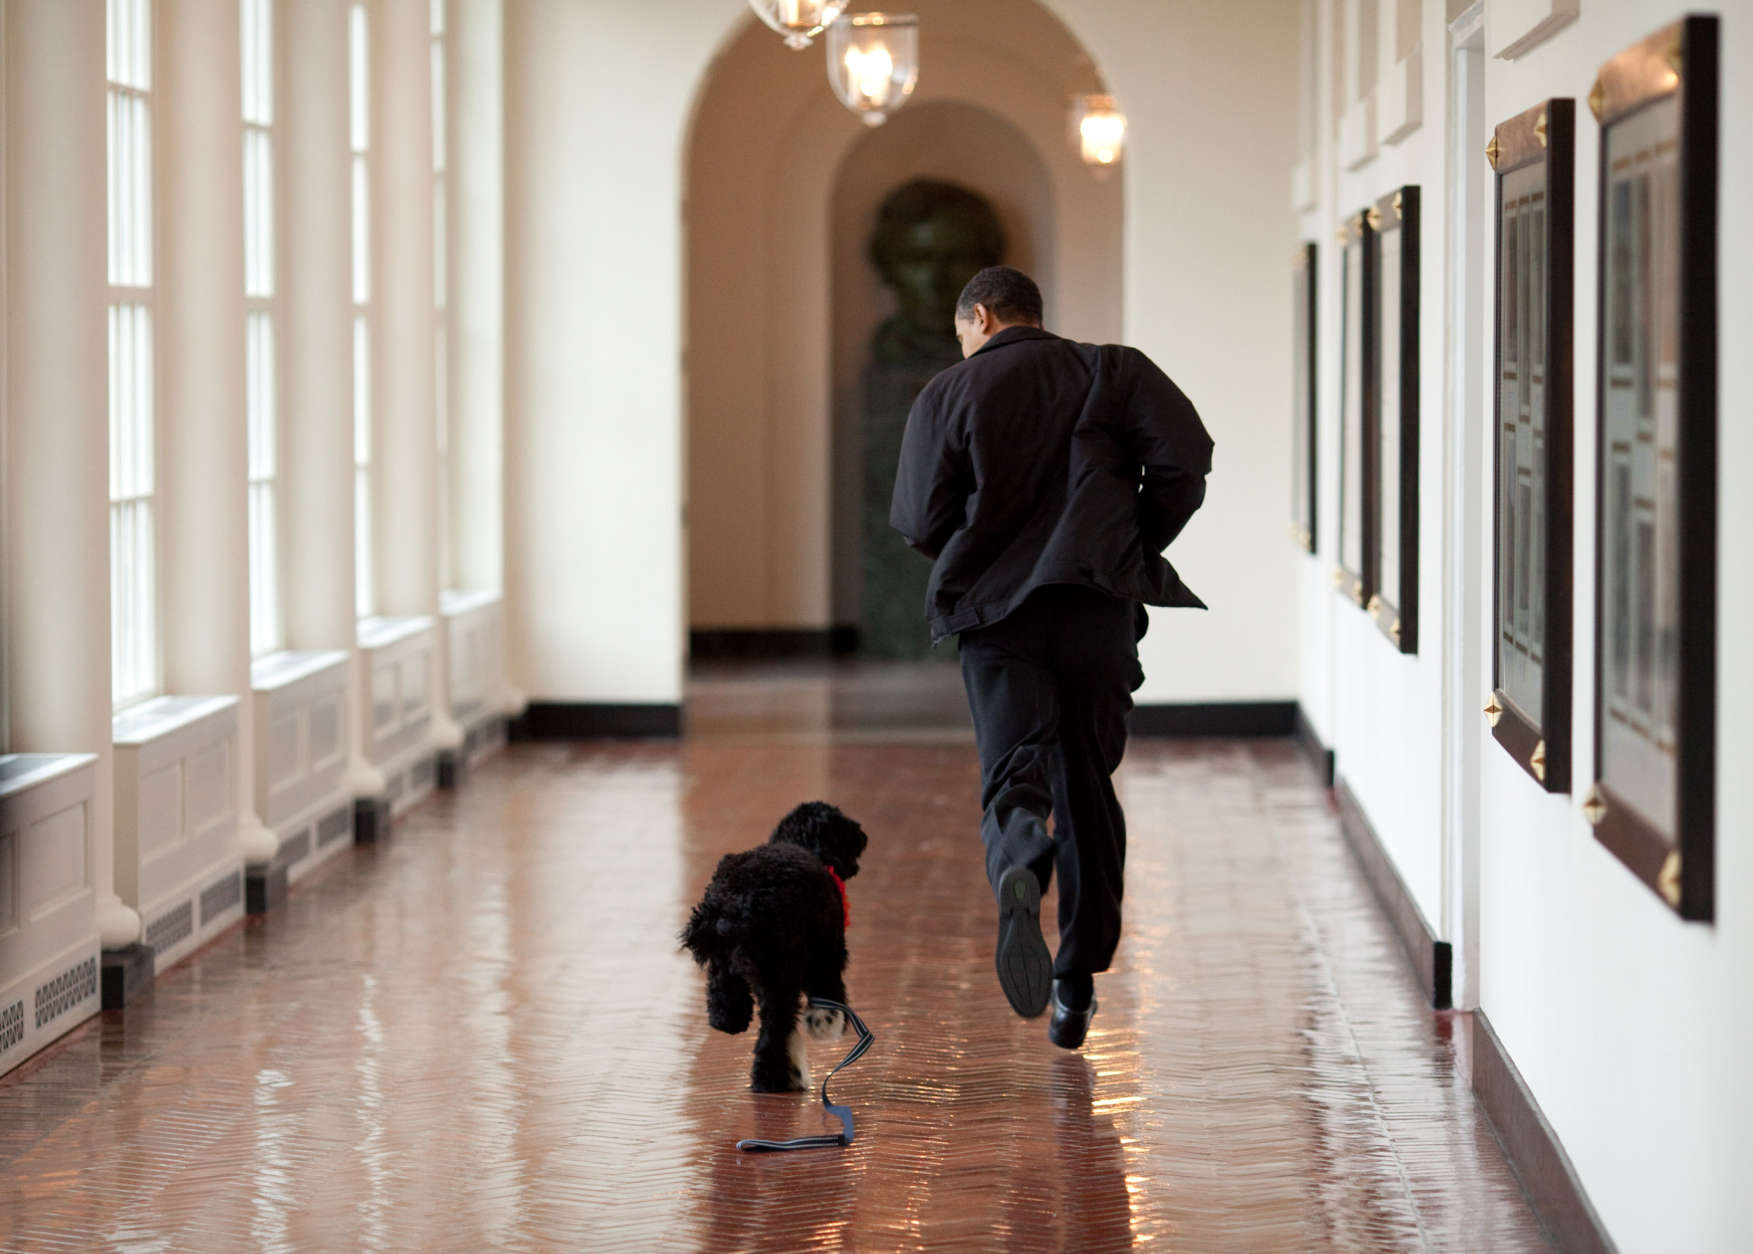 March 15, 2009
ÒThe Obama family was introduced to a prospective family dog at a secret greet on a Sunday. After spending about an hour with him, the family decided he was the one. Here, the dog ran alongside the President in an East Wing hallway. The dog returned to his trainer while the ObamaÕs embarked on their first international trip. I had to keep these photos secret until a few weeks later, when the dog was brought ÔhomeÕ to the White House and introduced to the world as Bo.Ó
(Official White House photo by Pete Souza)

This official White House photograph is being made available only for publication by news organizations and/or for personal use printing by the subject(s) of the photograph. The photograph may not be manipulated in any way and may not be used in commercial or political materials, advertisements, emails, products, promotions that in any way suggests approval or endorsement of the President, the First Family, or the White House.